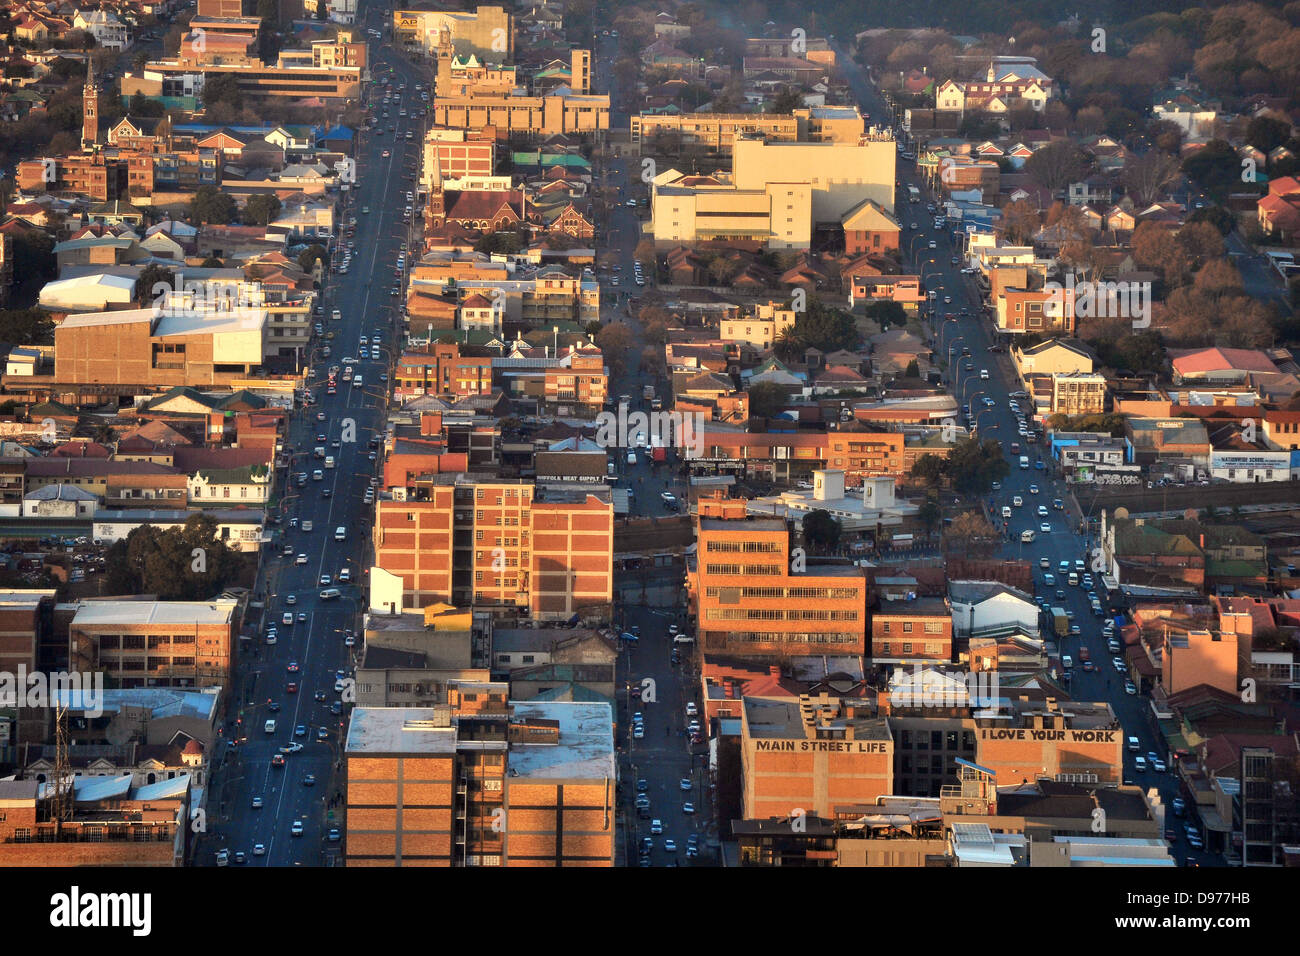 A view of the streets of Johannesburg seen from the top of a tall skyscraper. Stock Photo